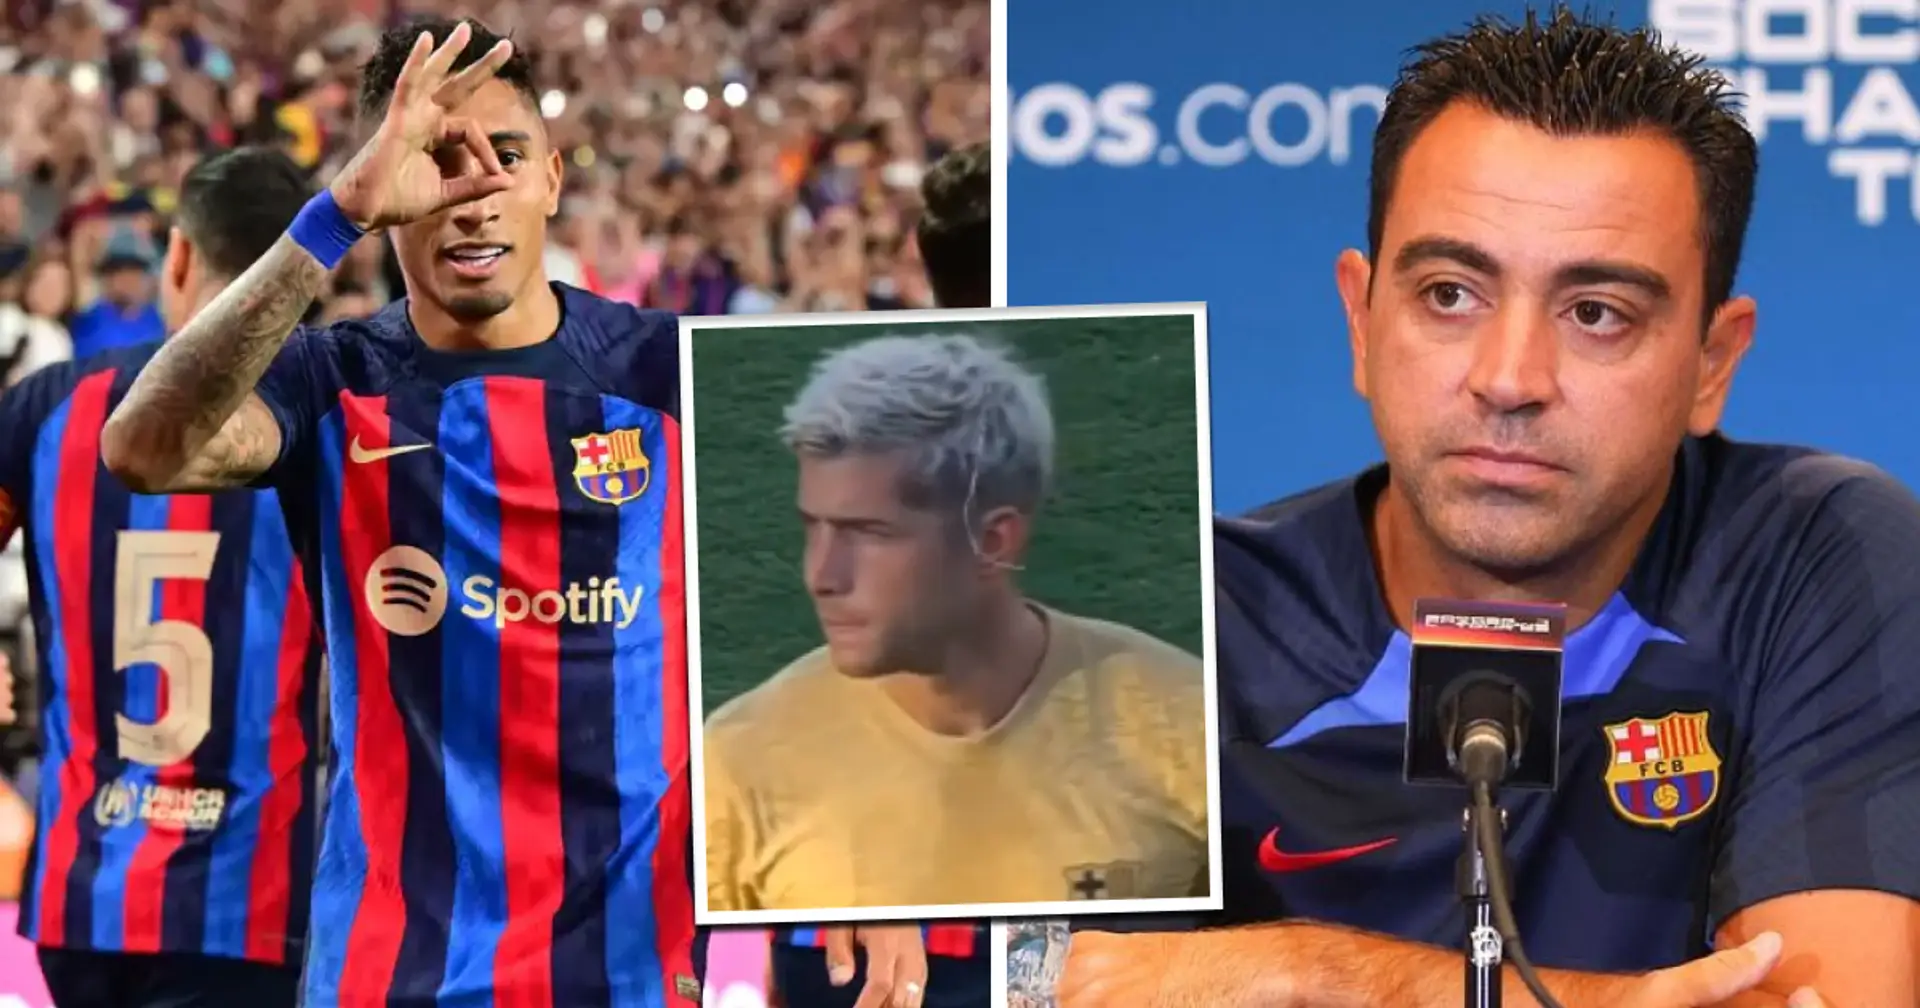 8 players who have impressed Xavi in preseason, 3 who haven't